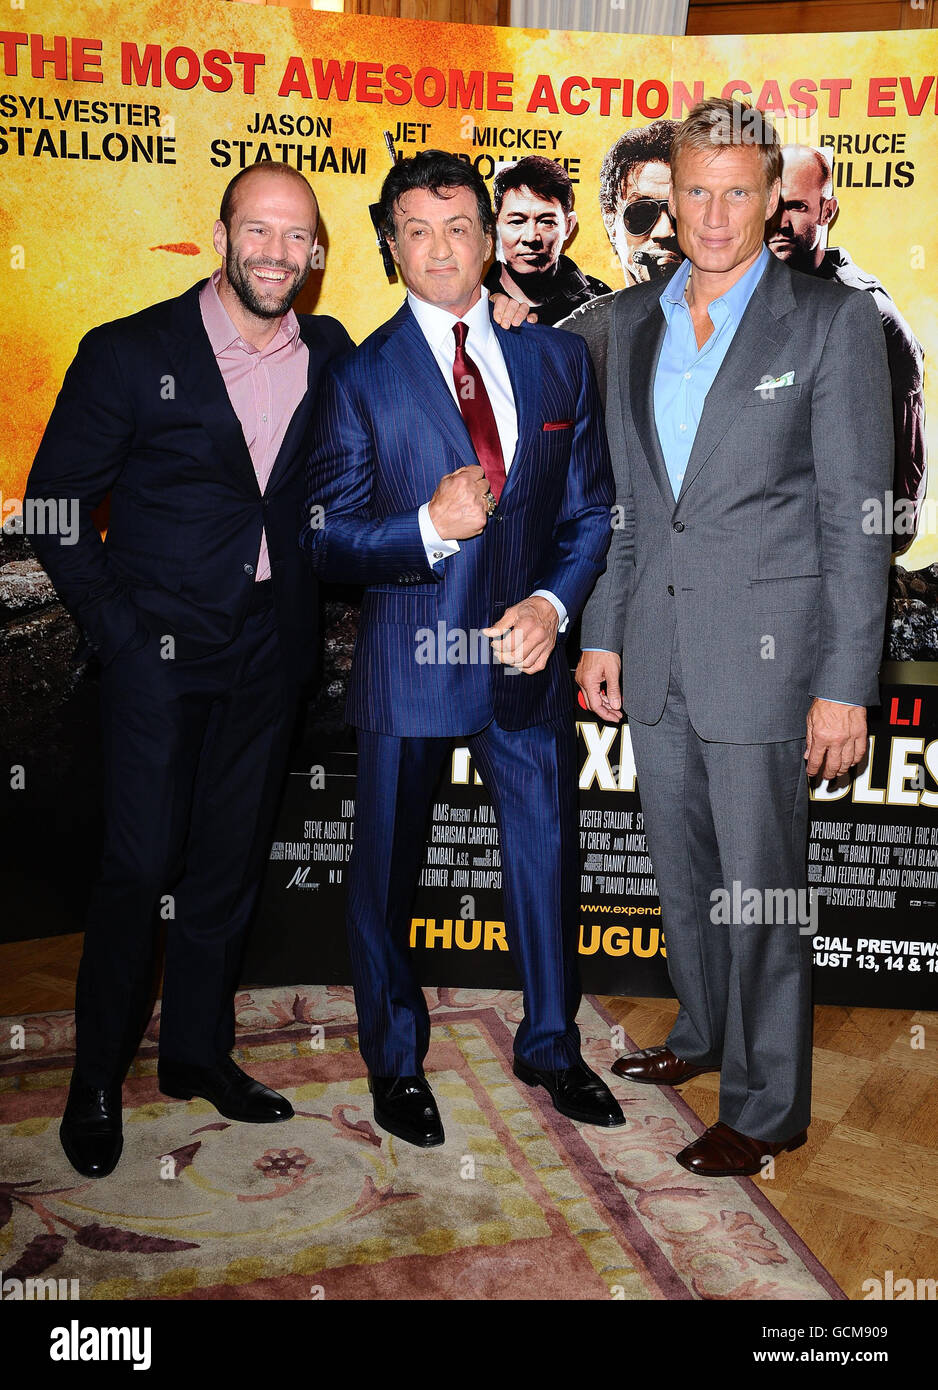 Jason Statham (left), Sylvester Stallone (centre) and Dolph Lundgren arrive at a photocall for new film The Expendables at the Dorchester in London. Stock Photo